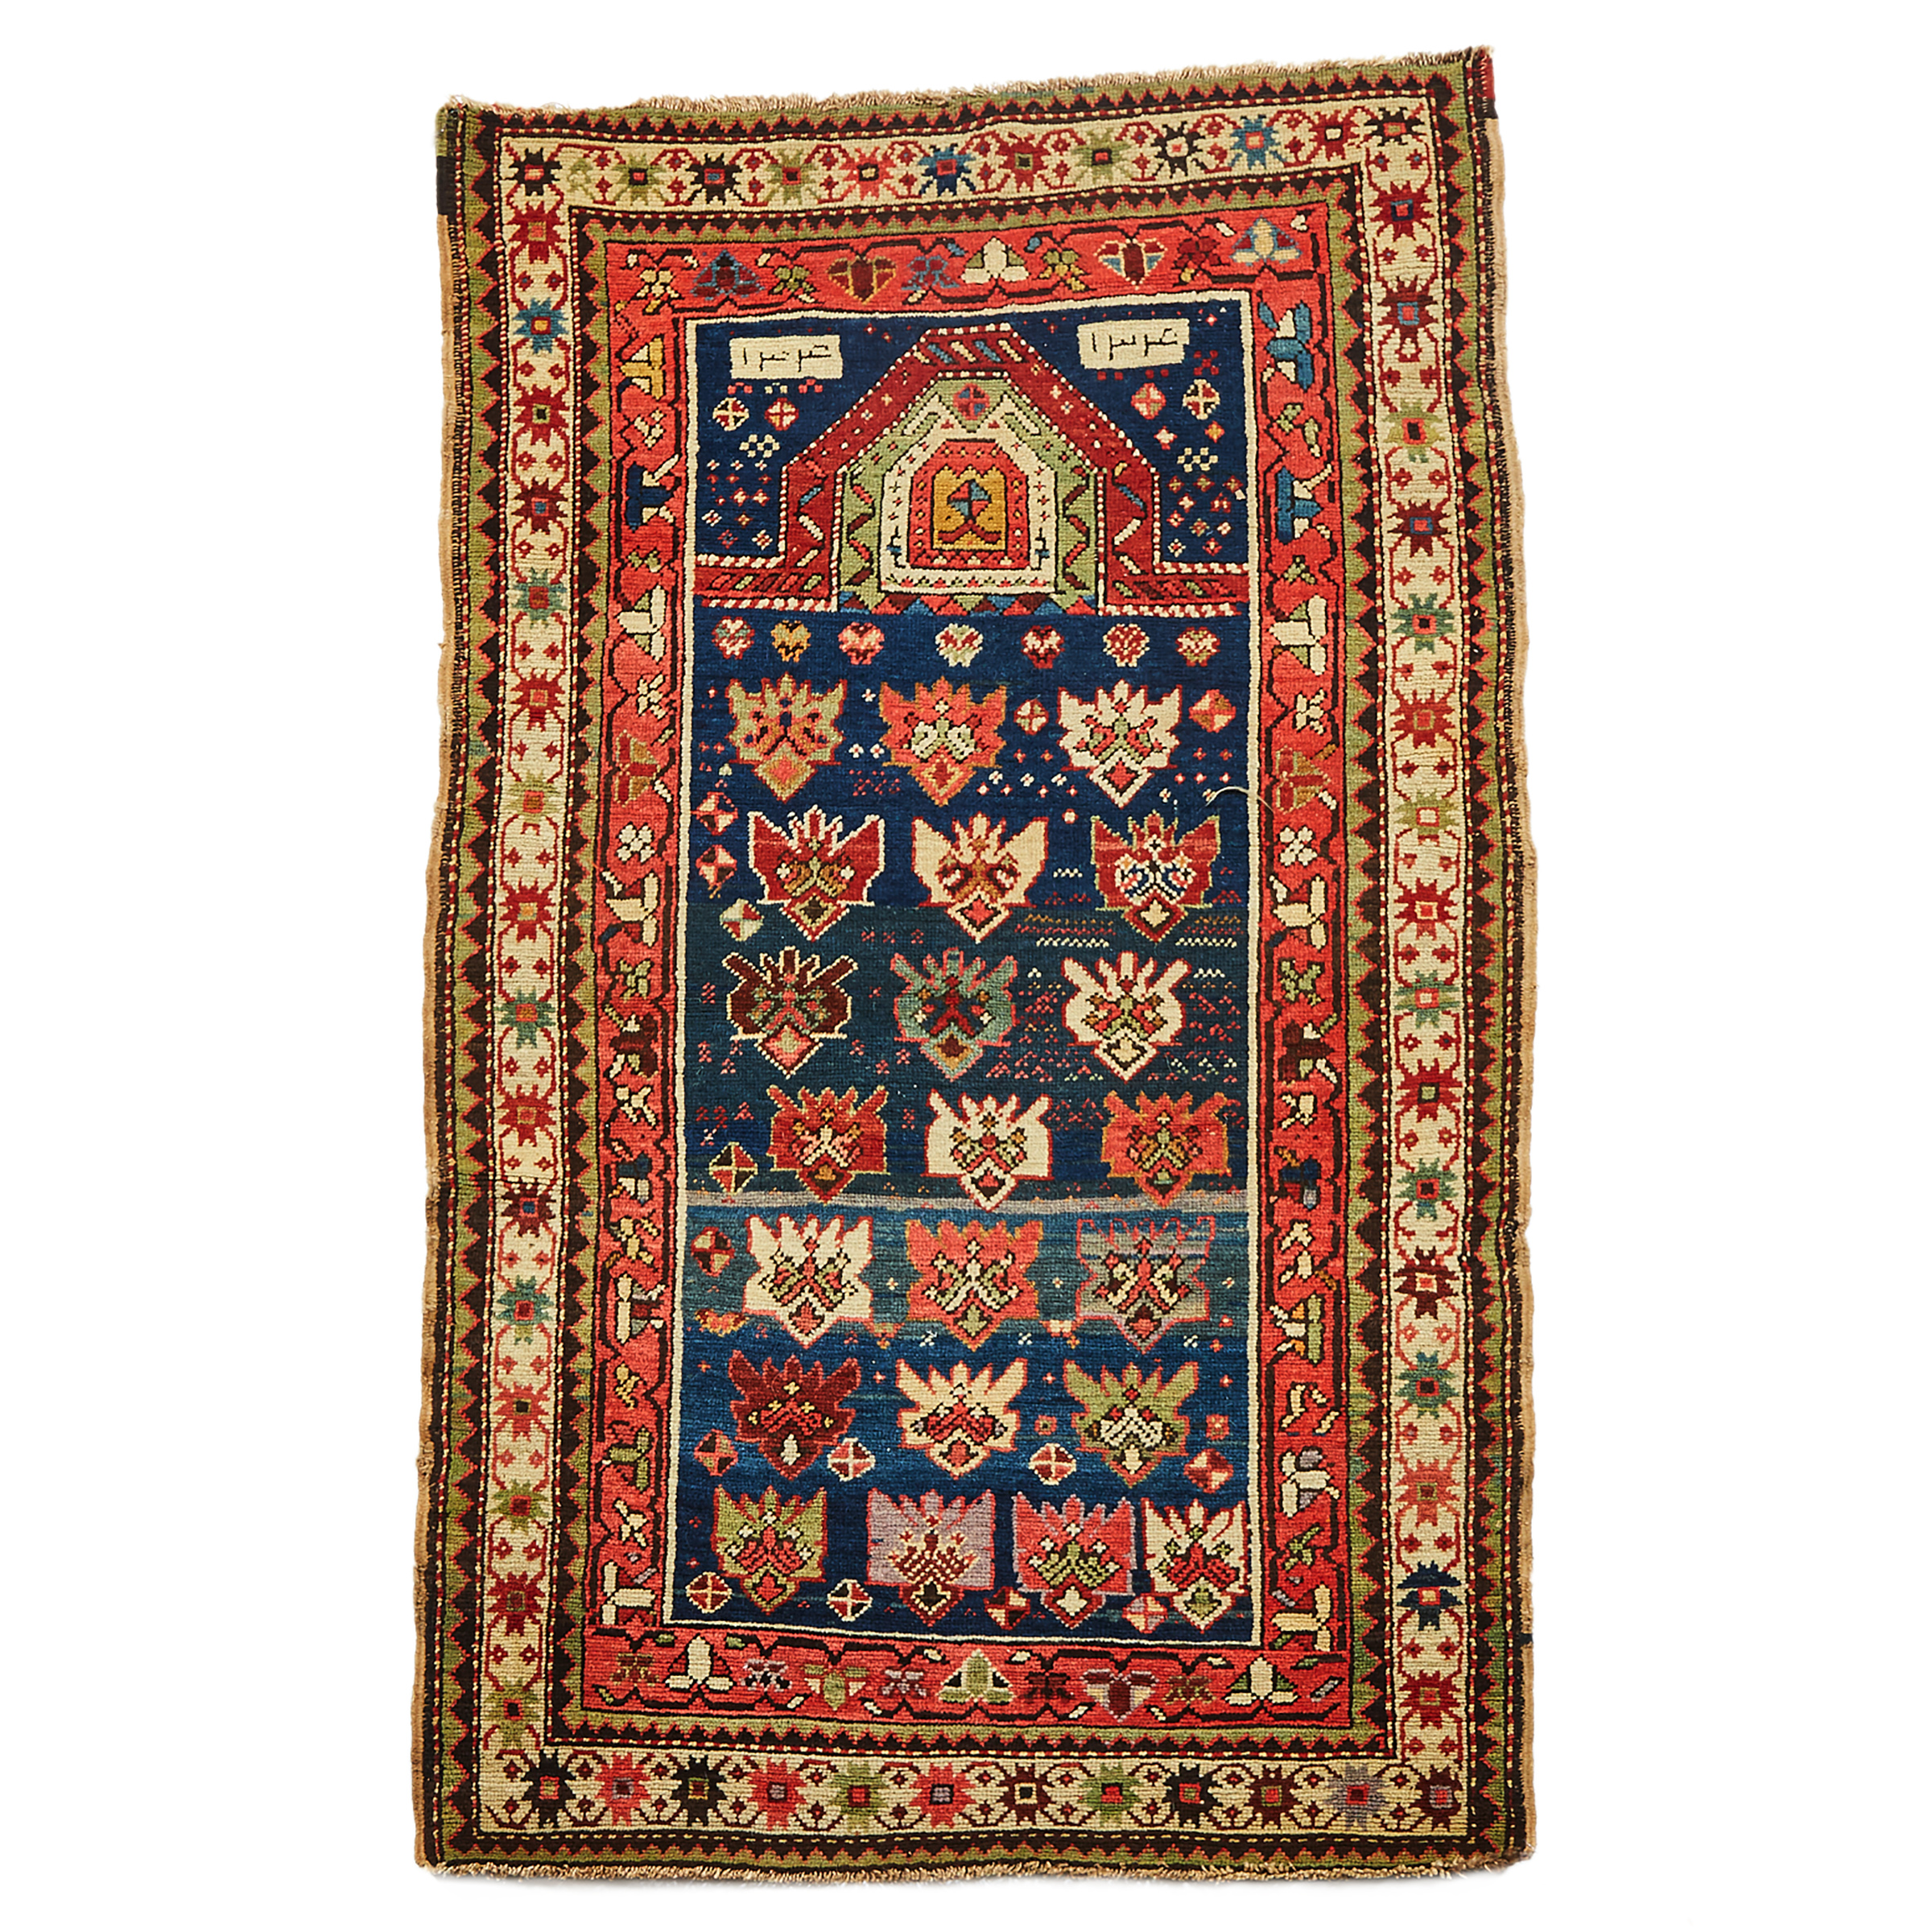 South Caucasian Prayer Rug, possibly dated 1912, late 19th/ early 20th century